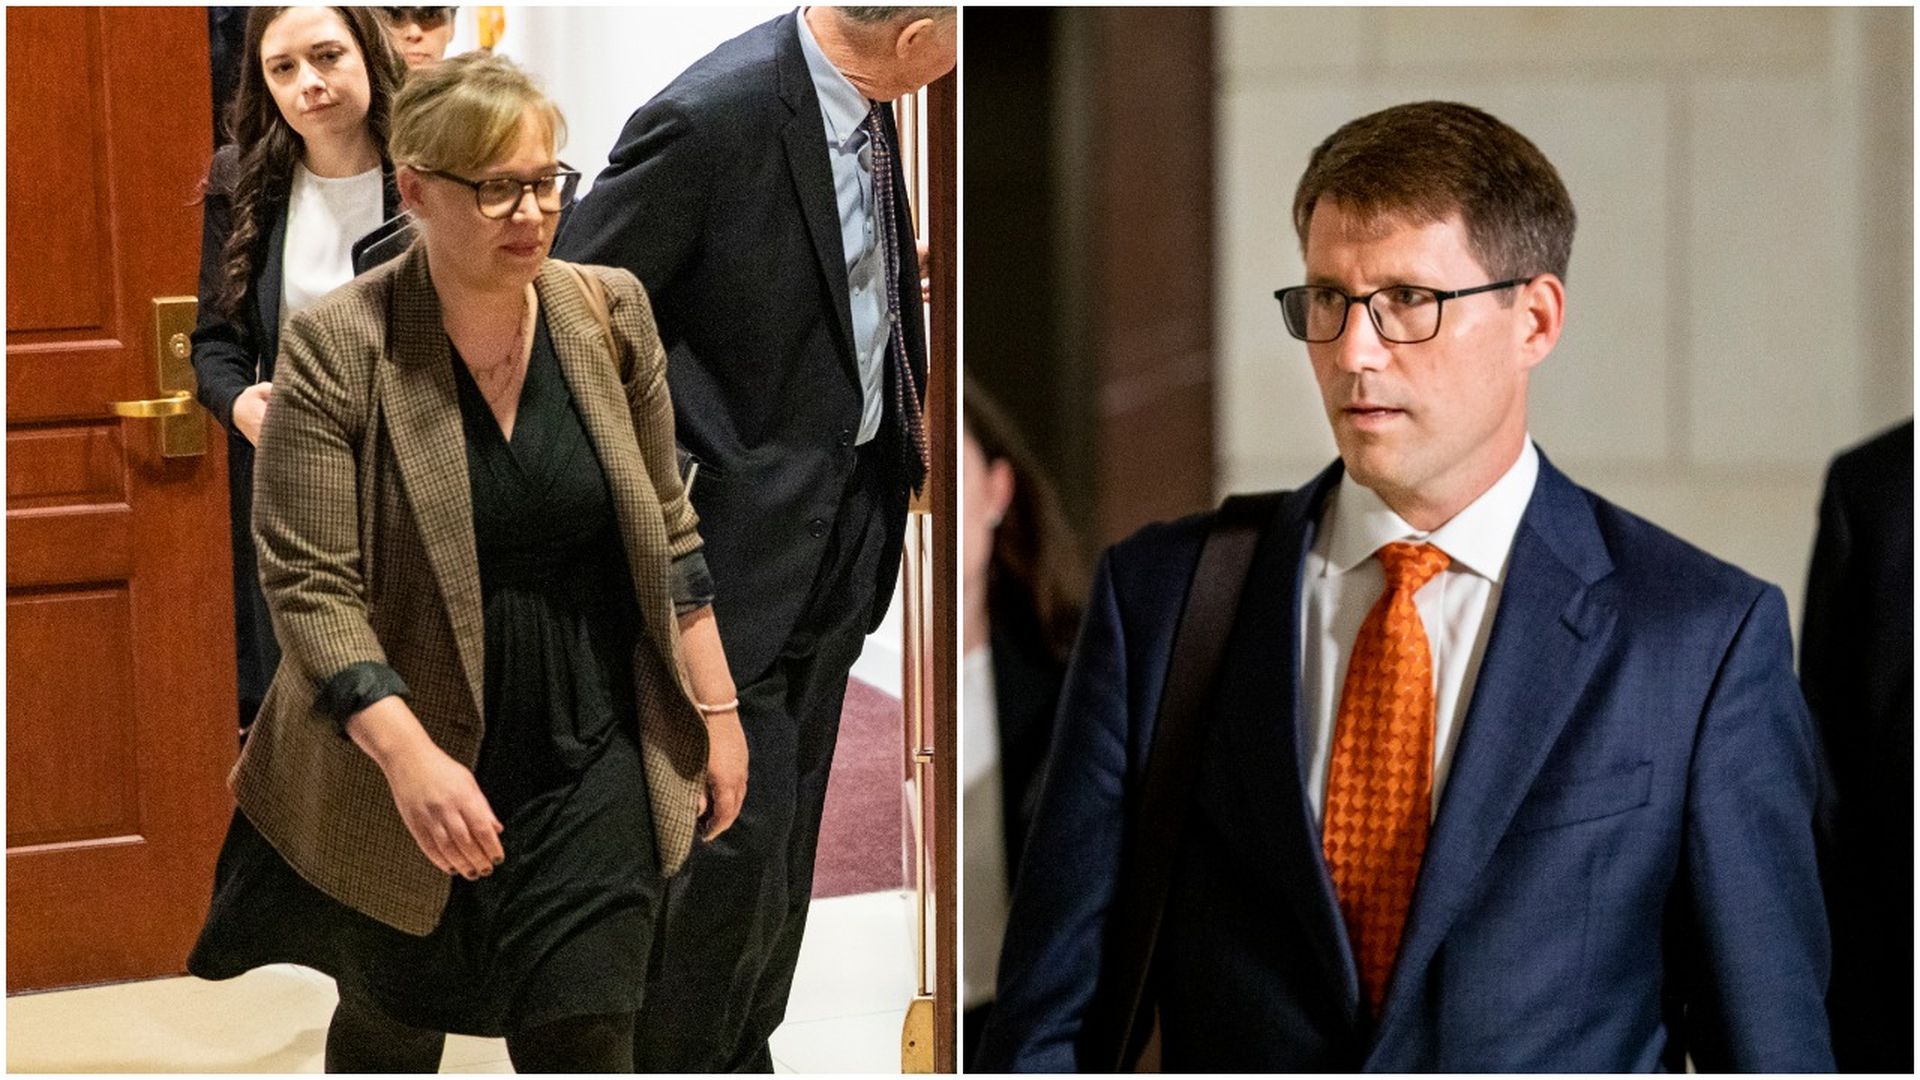 This image is a split screen between Croft and Anderson, who are both walking down hallways in Congress